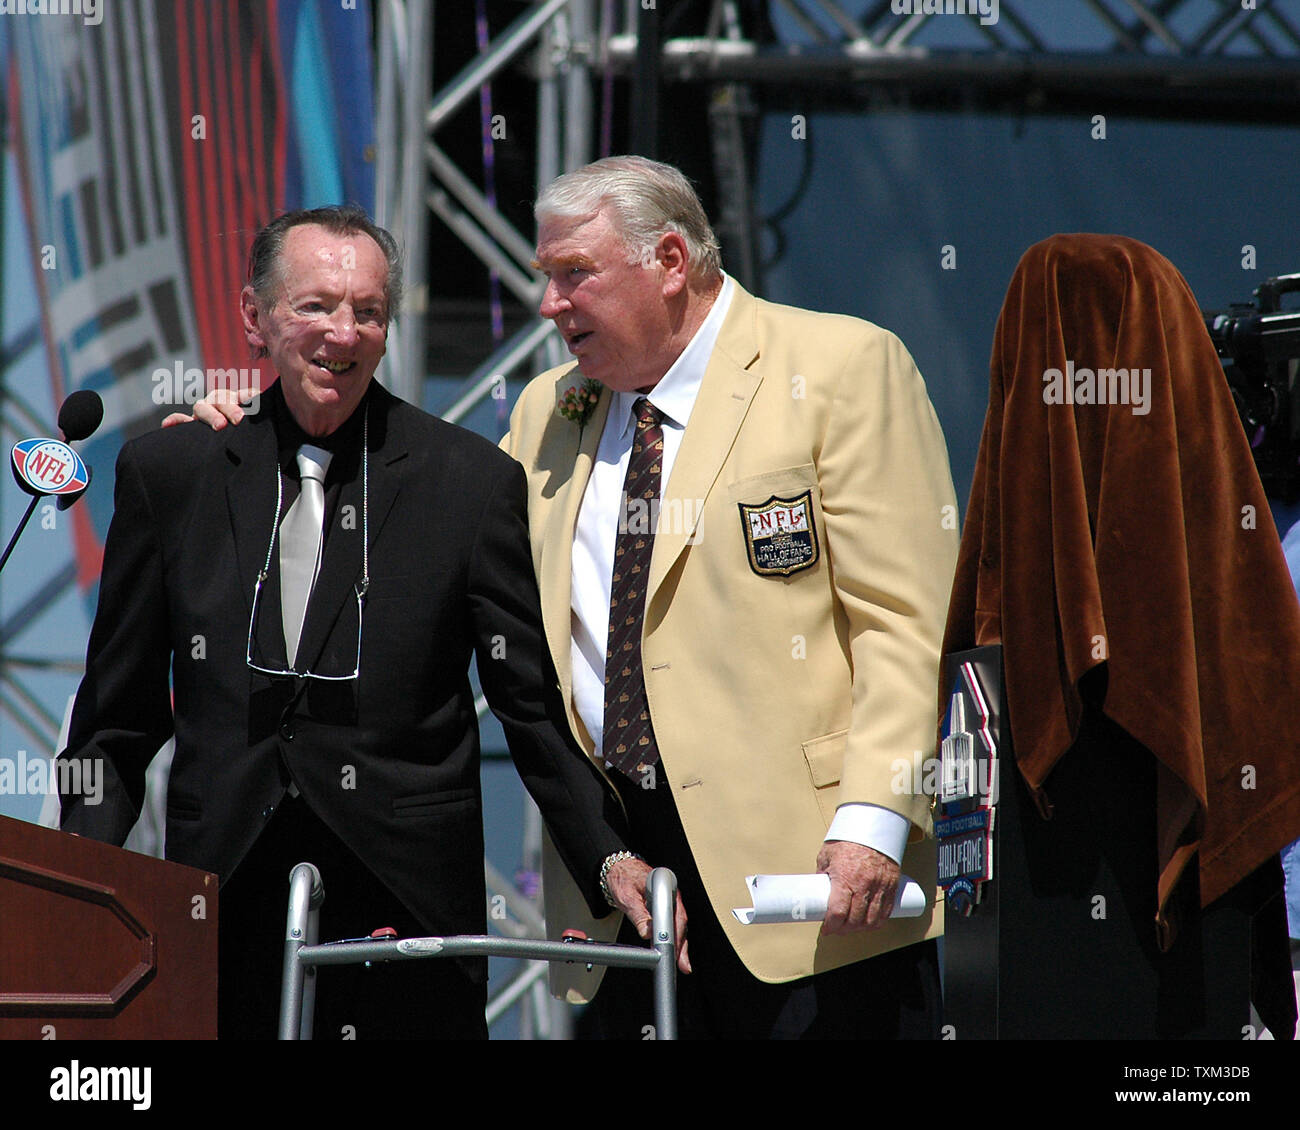 Al Davis, owner of the Oakland Raiders and Hall of Fame Class of 1992, introduces John Madden at the enshrinement ceremony at the Football Hall of Fame on August 5, 2006 in Canton, Ohio. (UPI Photo/Stephanie Krell) Stock Photo